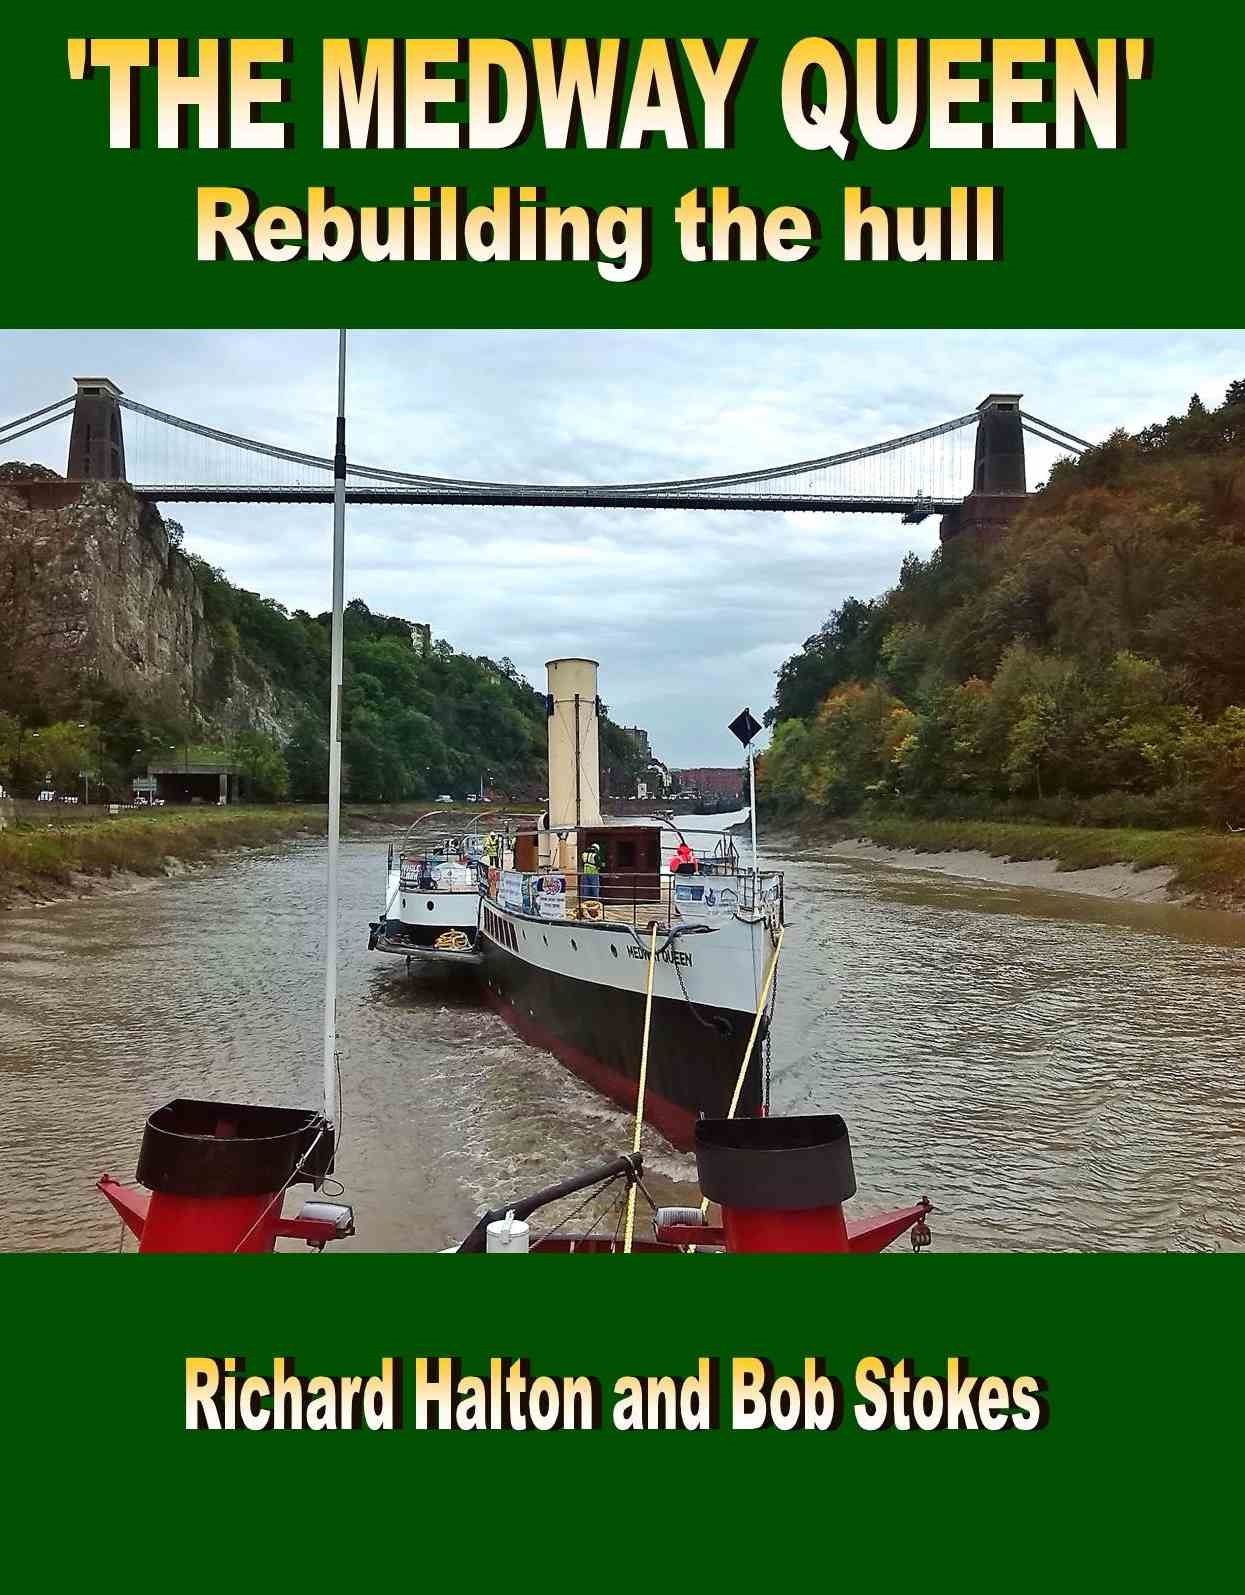 The Medway Queen -Rebuilding the hull